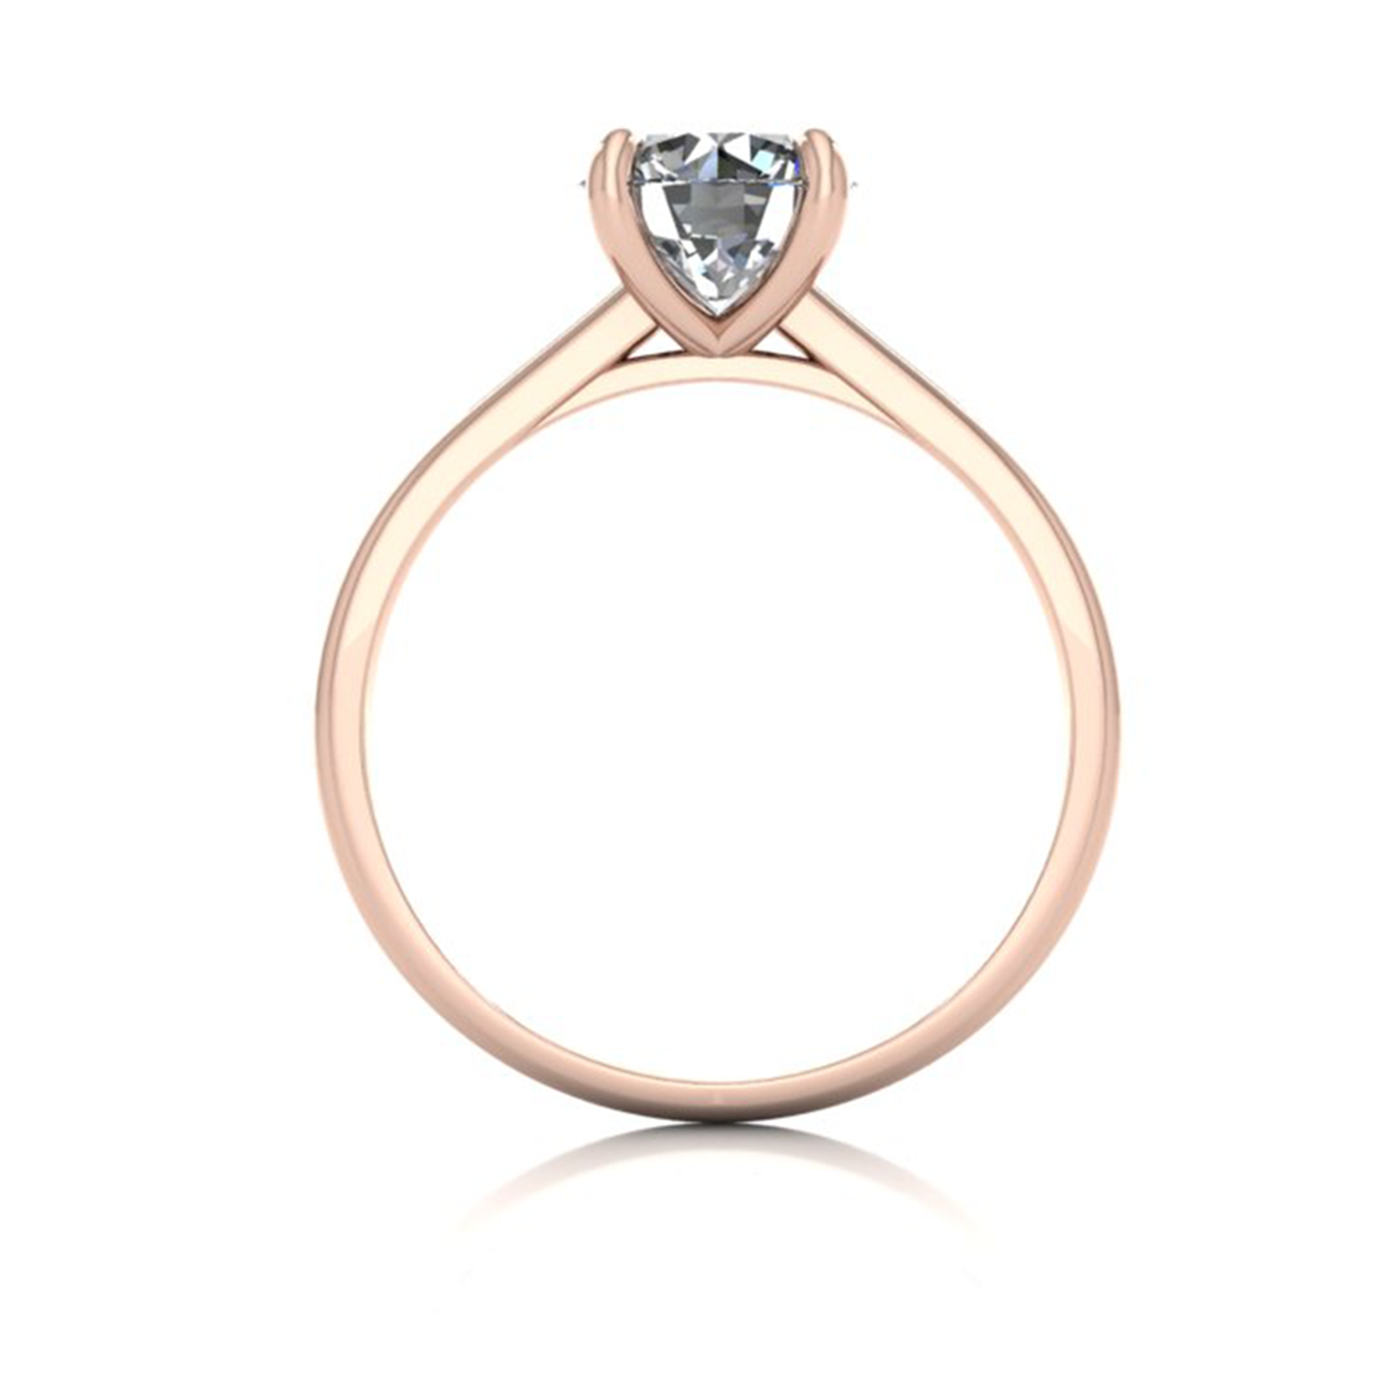 18k rose gold 1.20ct 4 prongs solitaire round cut diamond engagement ring with whisper thin band